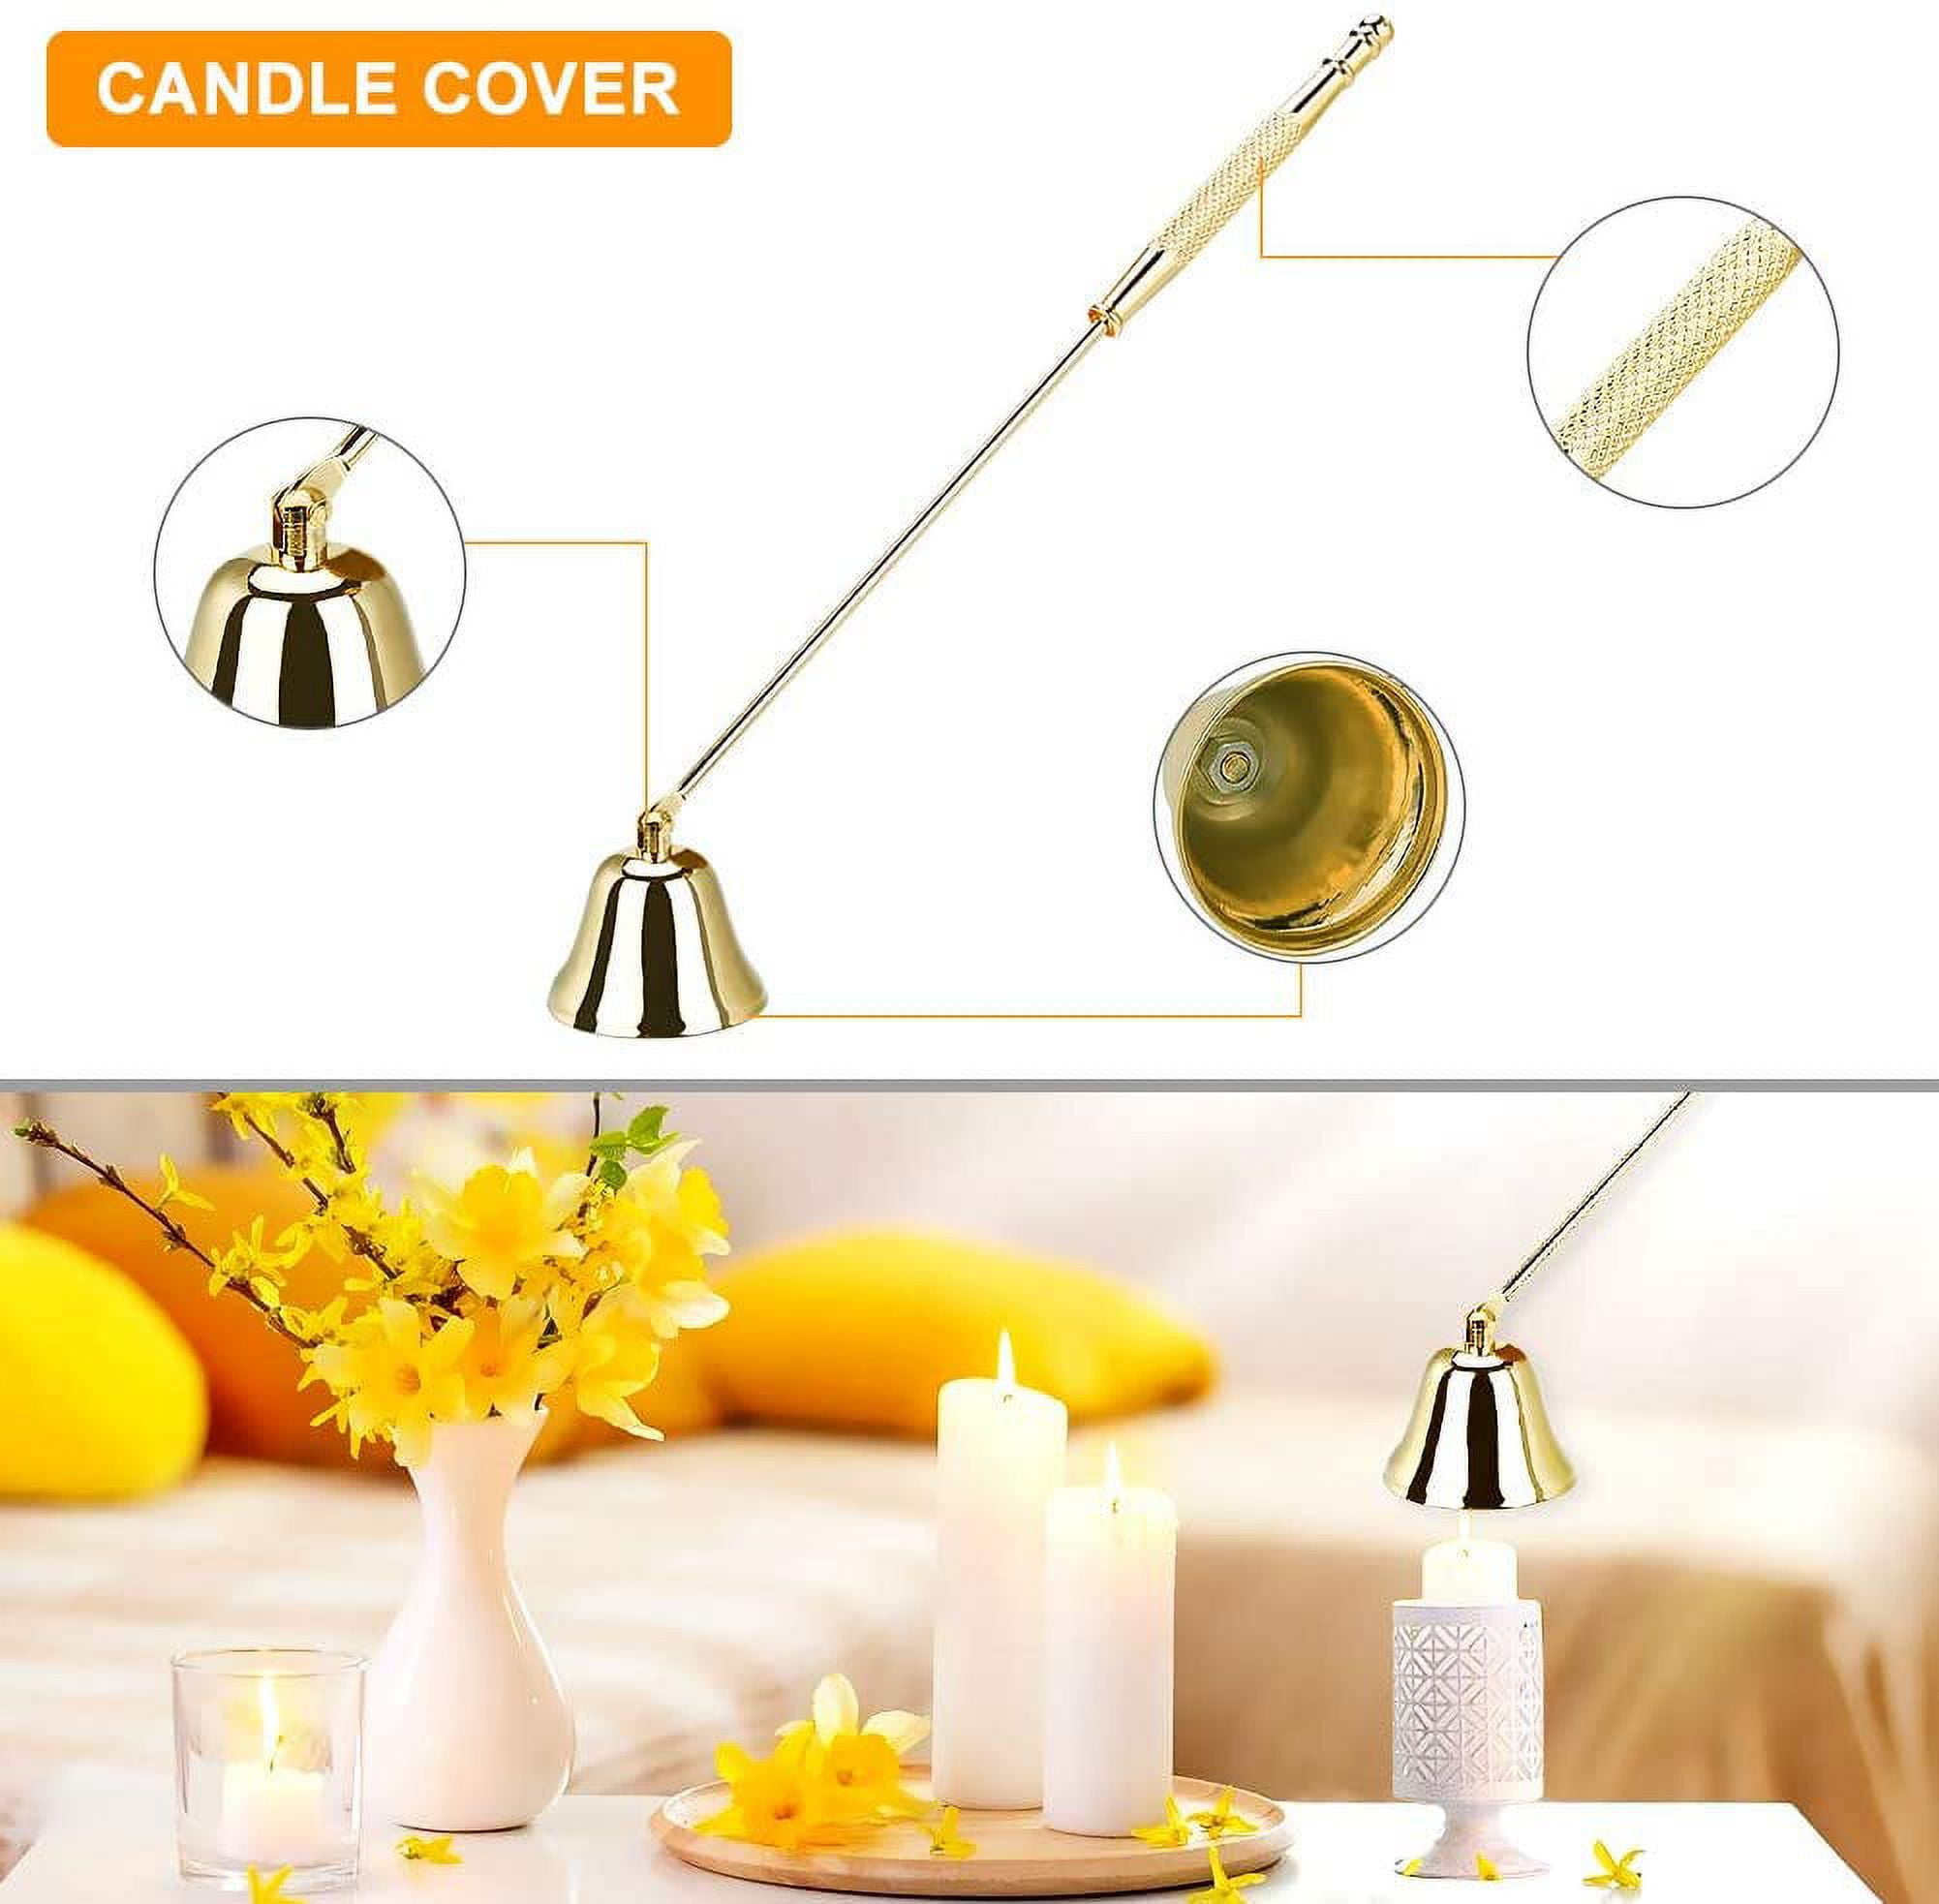 DANGSHAN 3 in 1 Candle Accessory Set, Candle Wick Trimmer Candle Snuffer  Candle Wick Dipper for Candle Lover (Black)